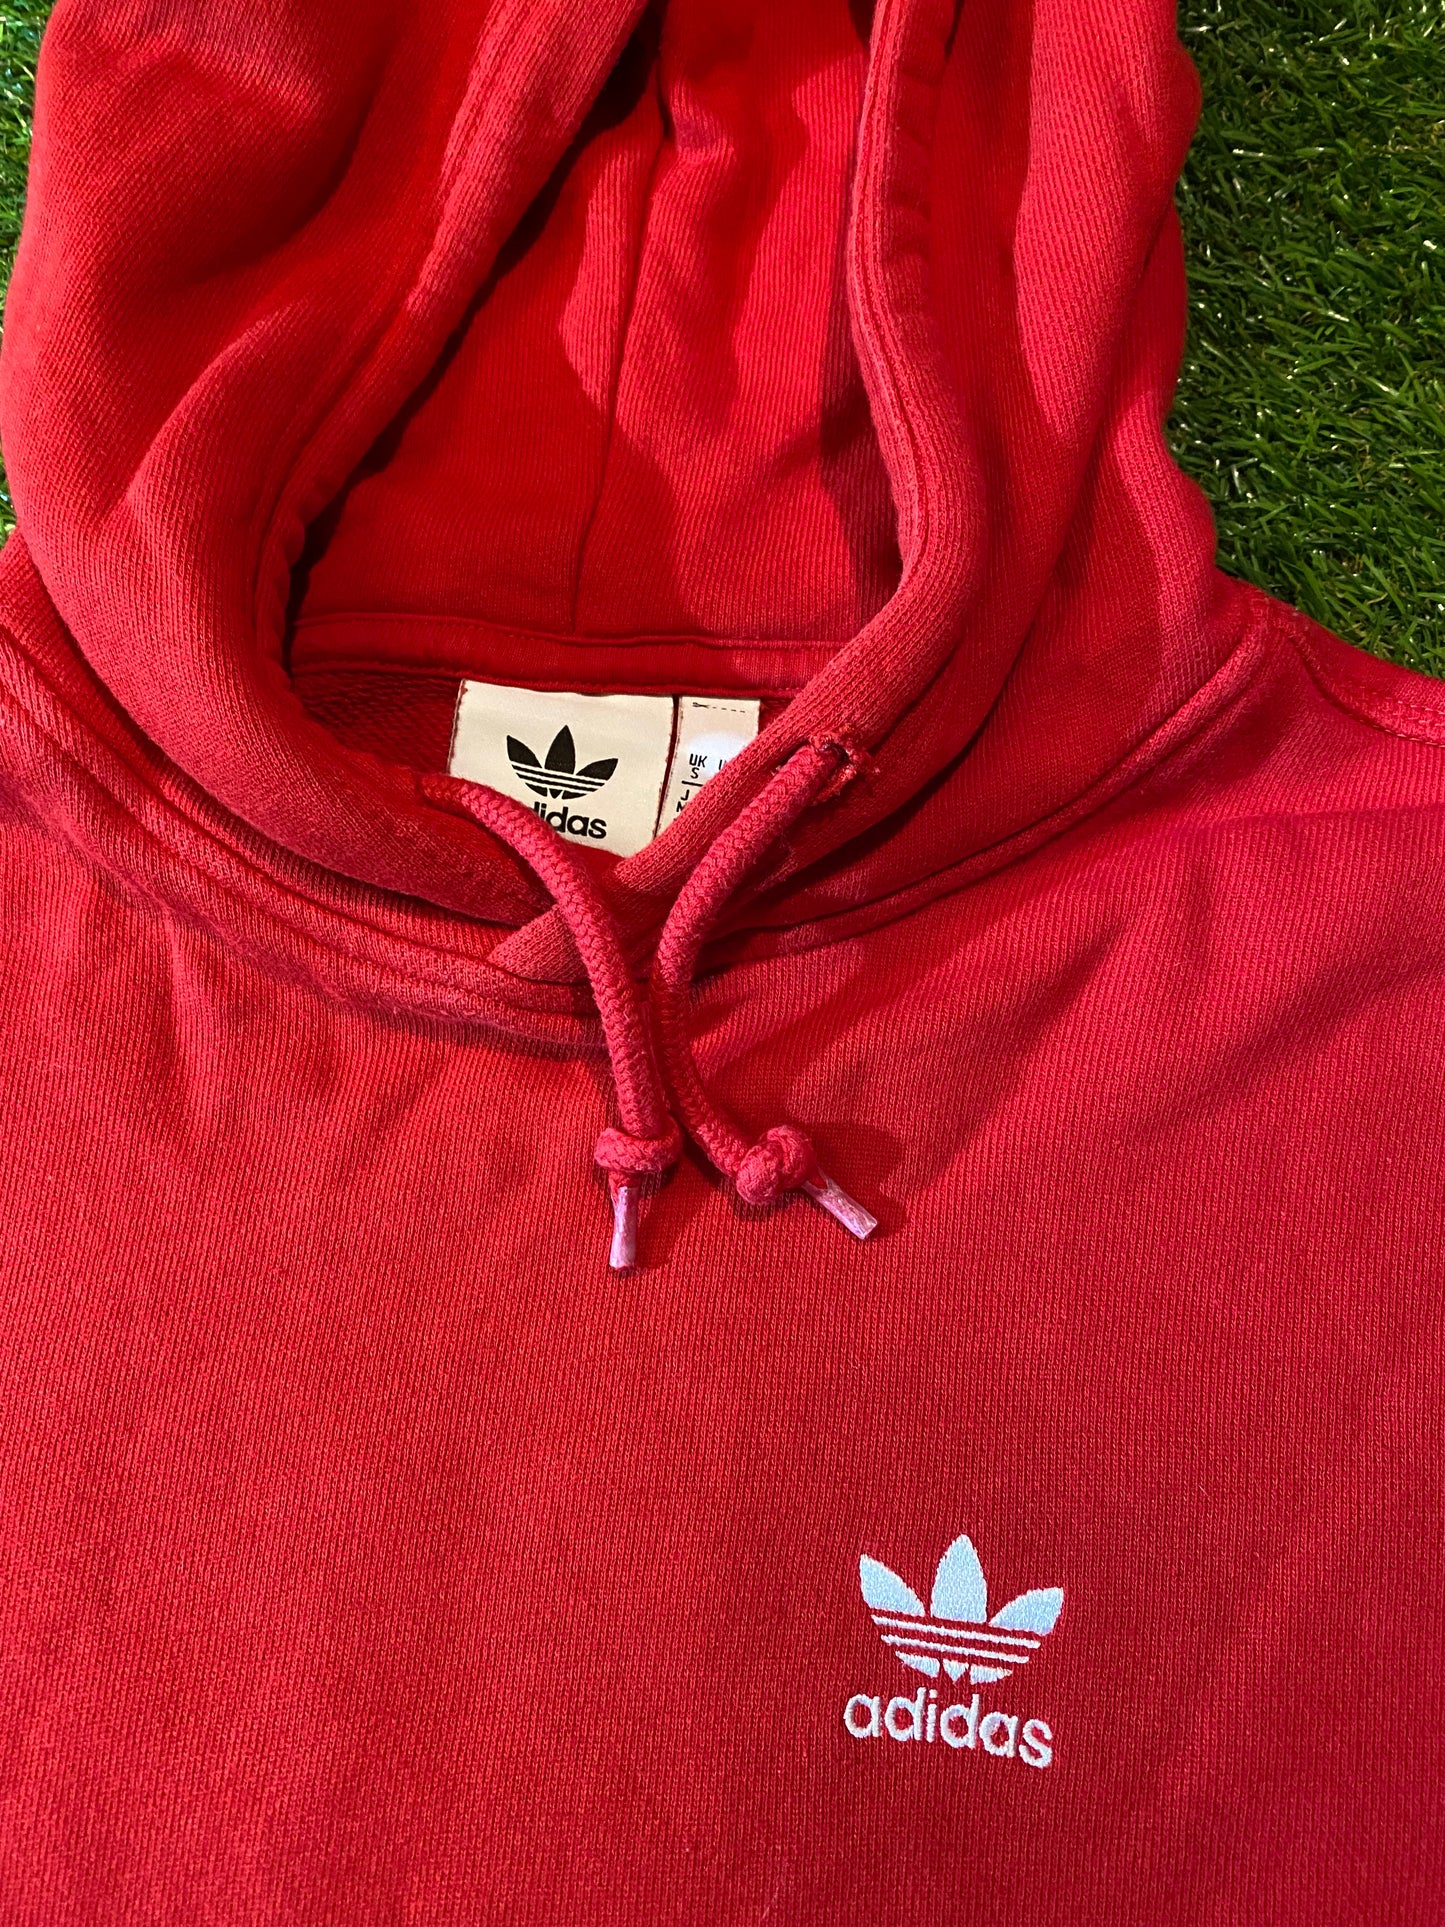 Vintage Adidas Made 3 Stripes Sports Small Mans Heavier Longer Hoody Hooded Top